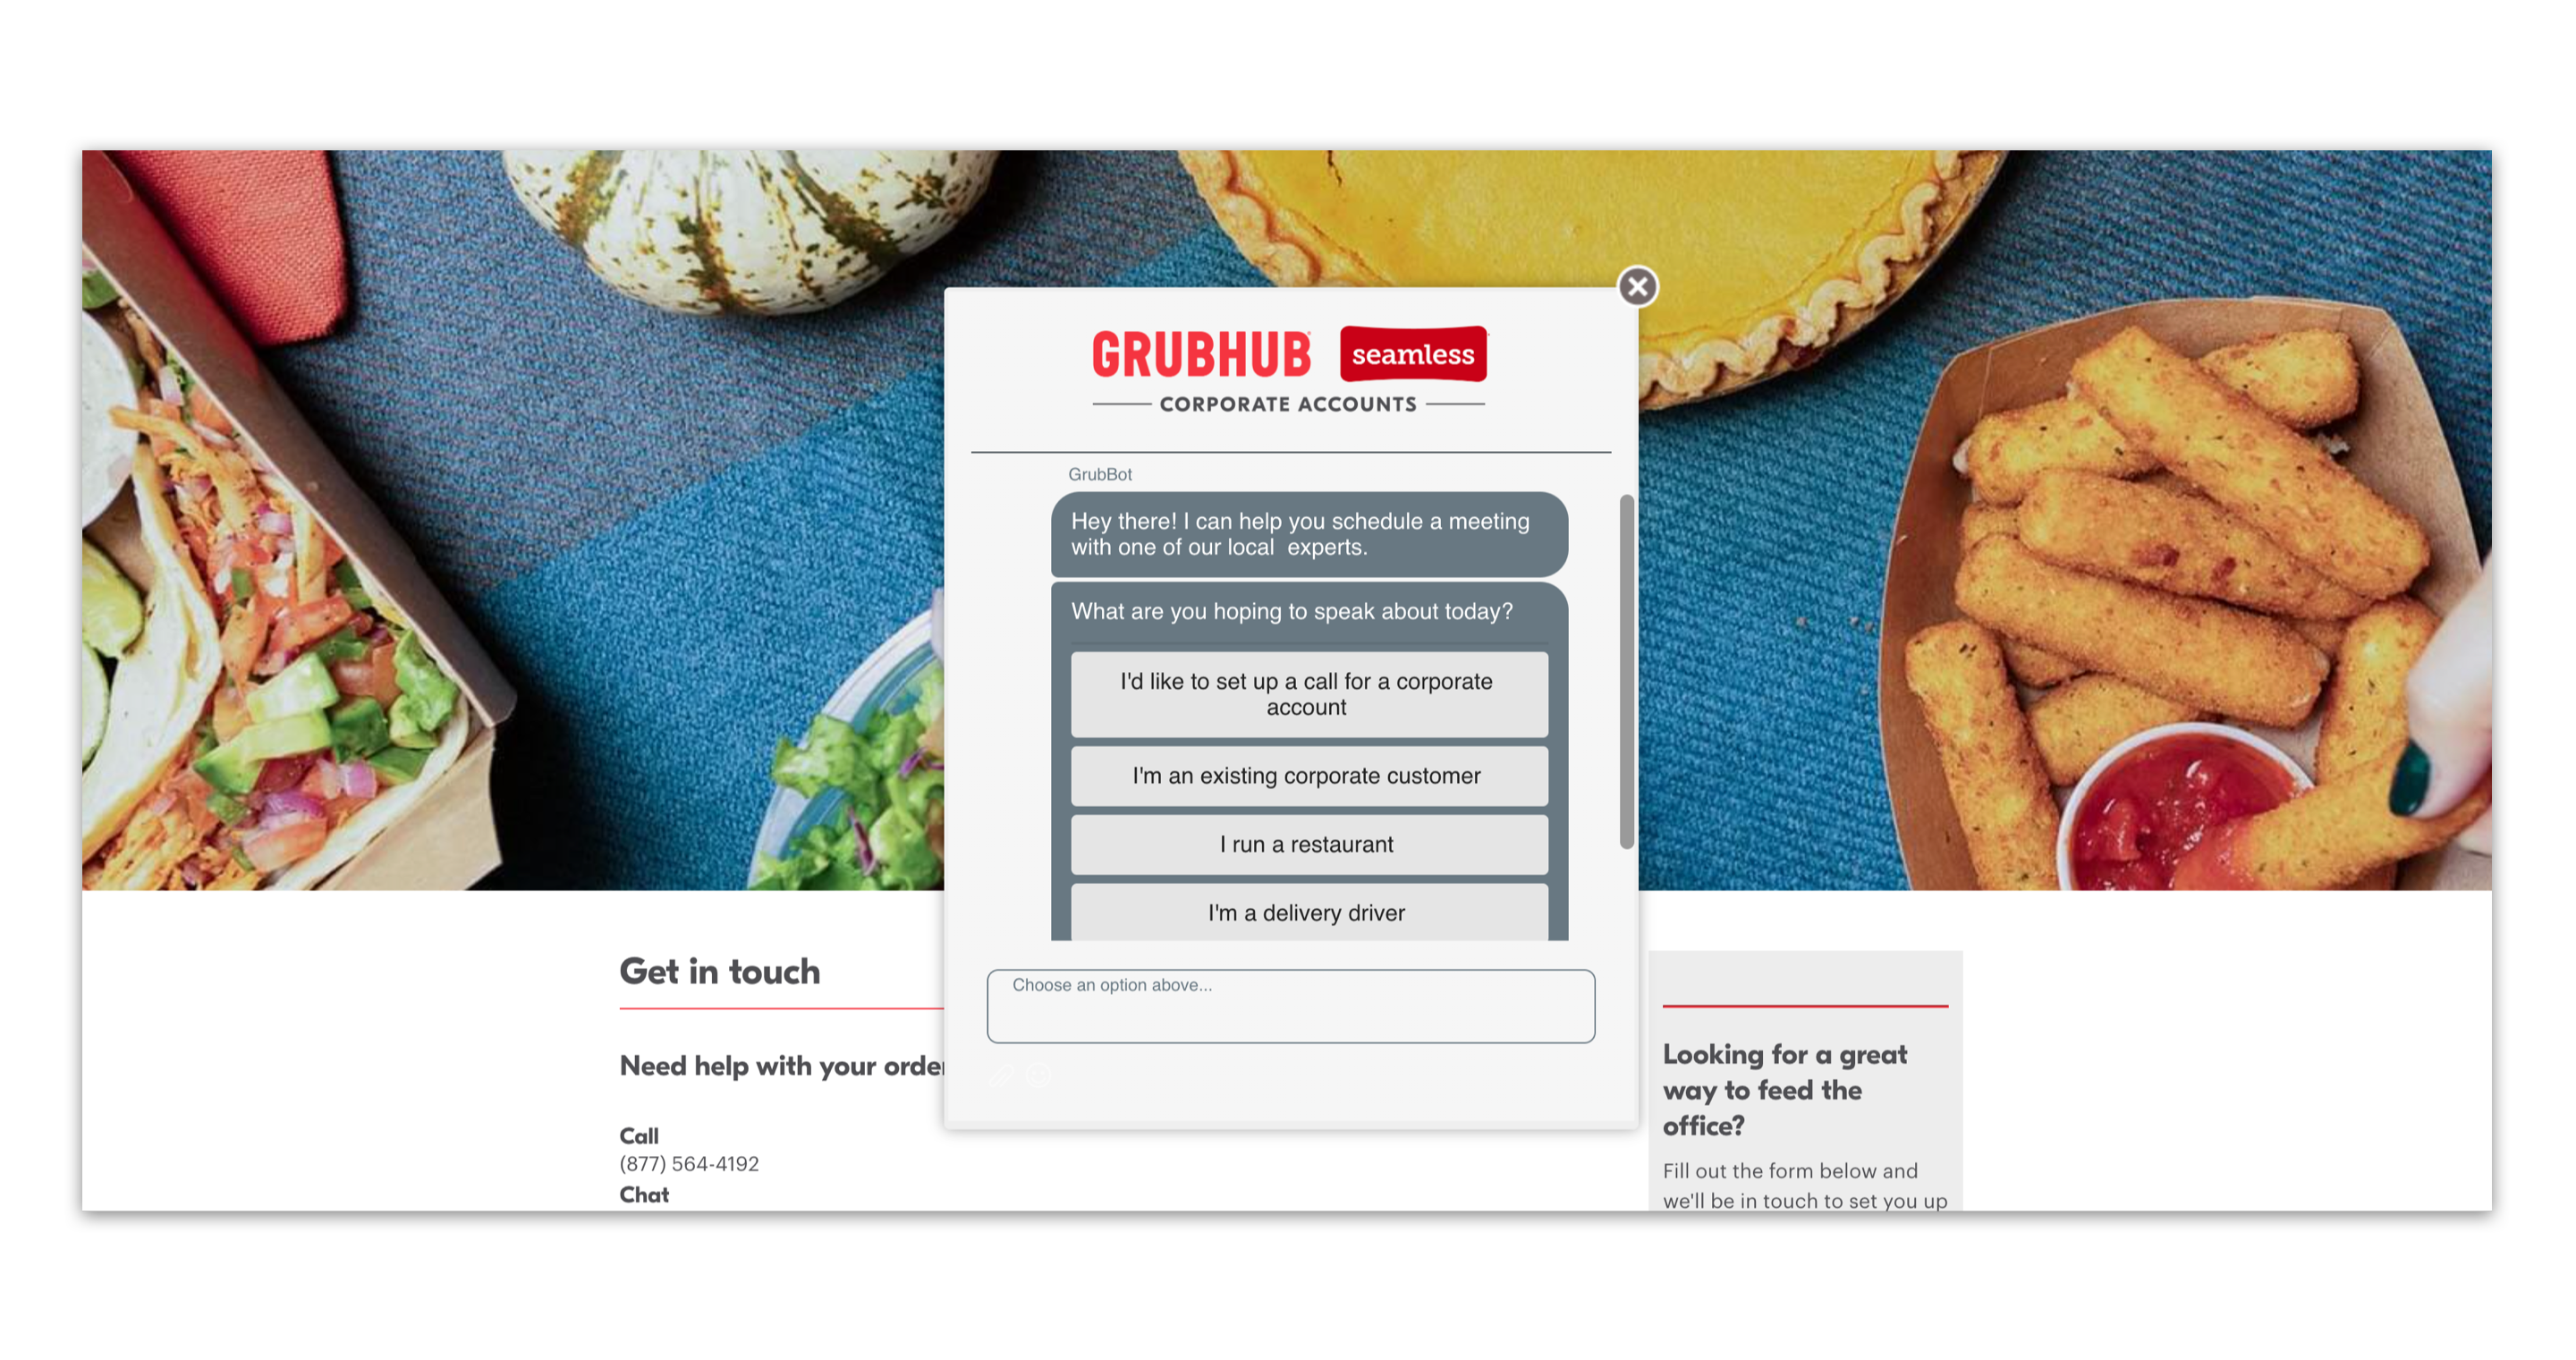 grubhub live chat window powered by drift, displaying automated messages to begin the conversation and route it to the correct department